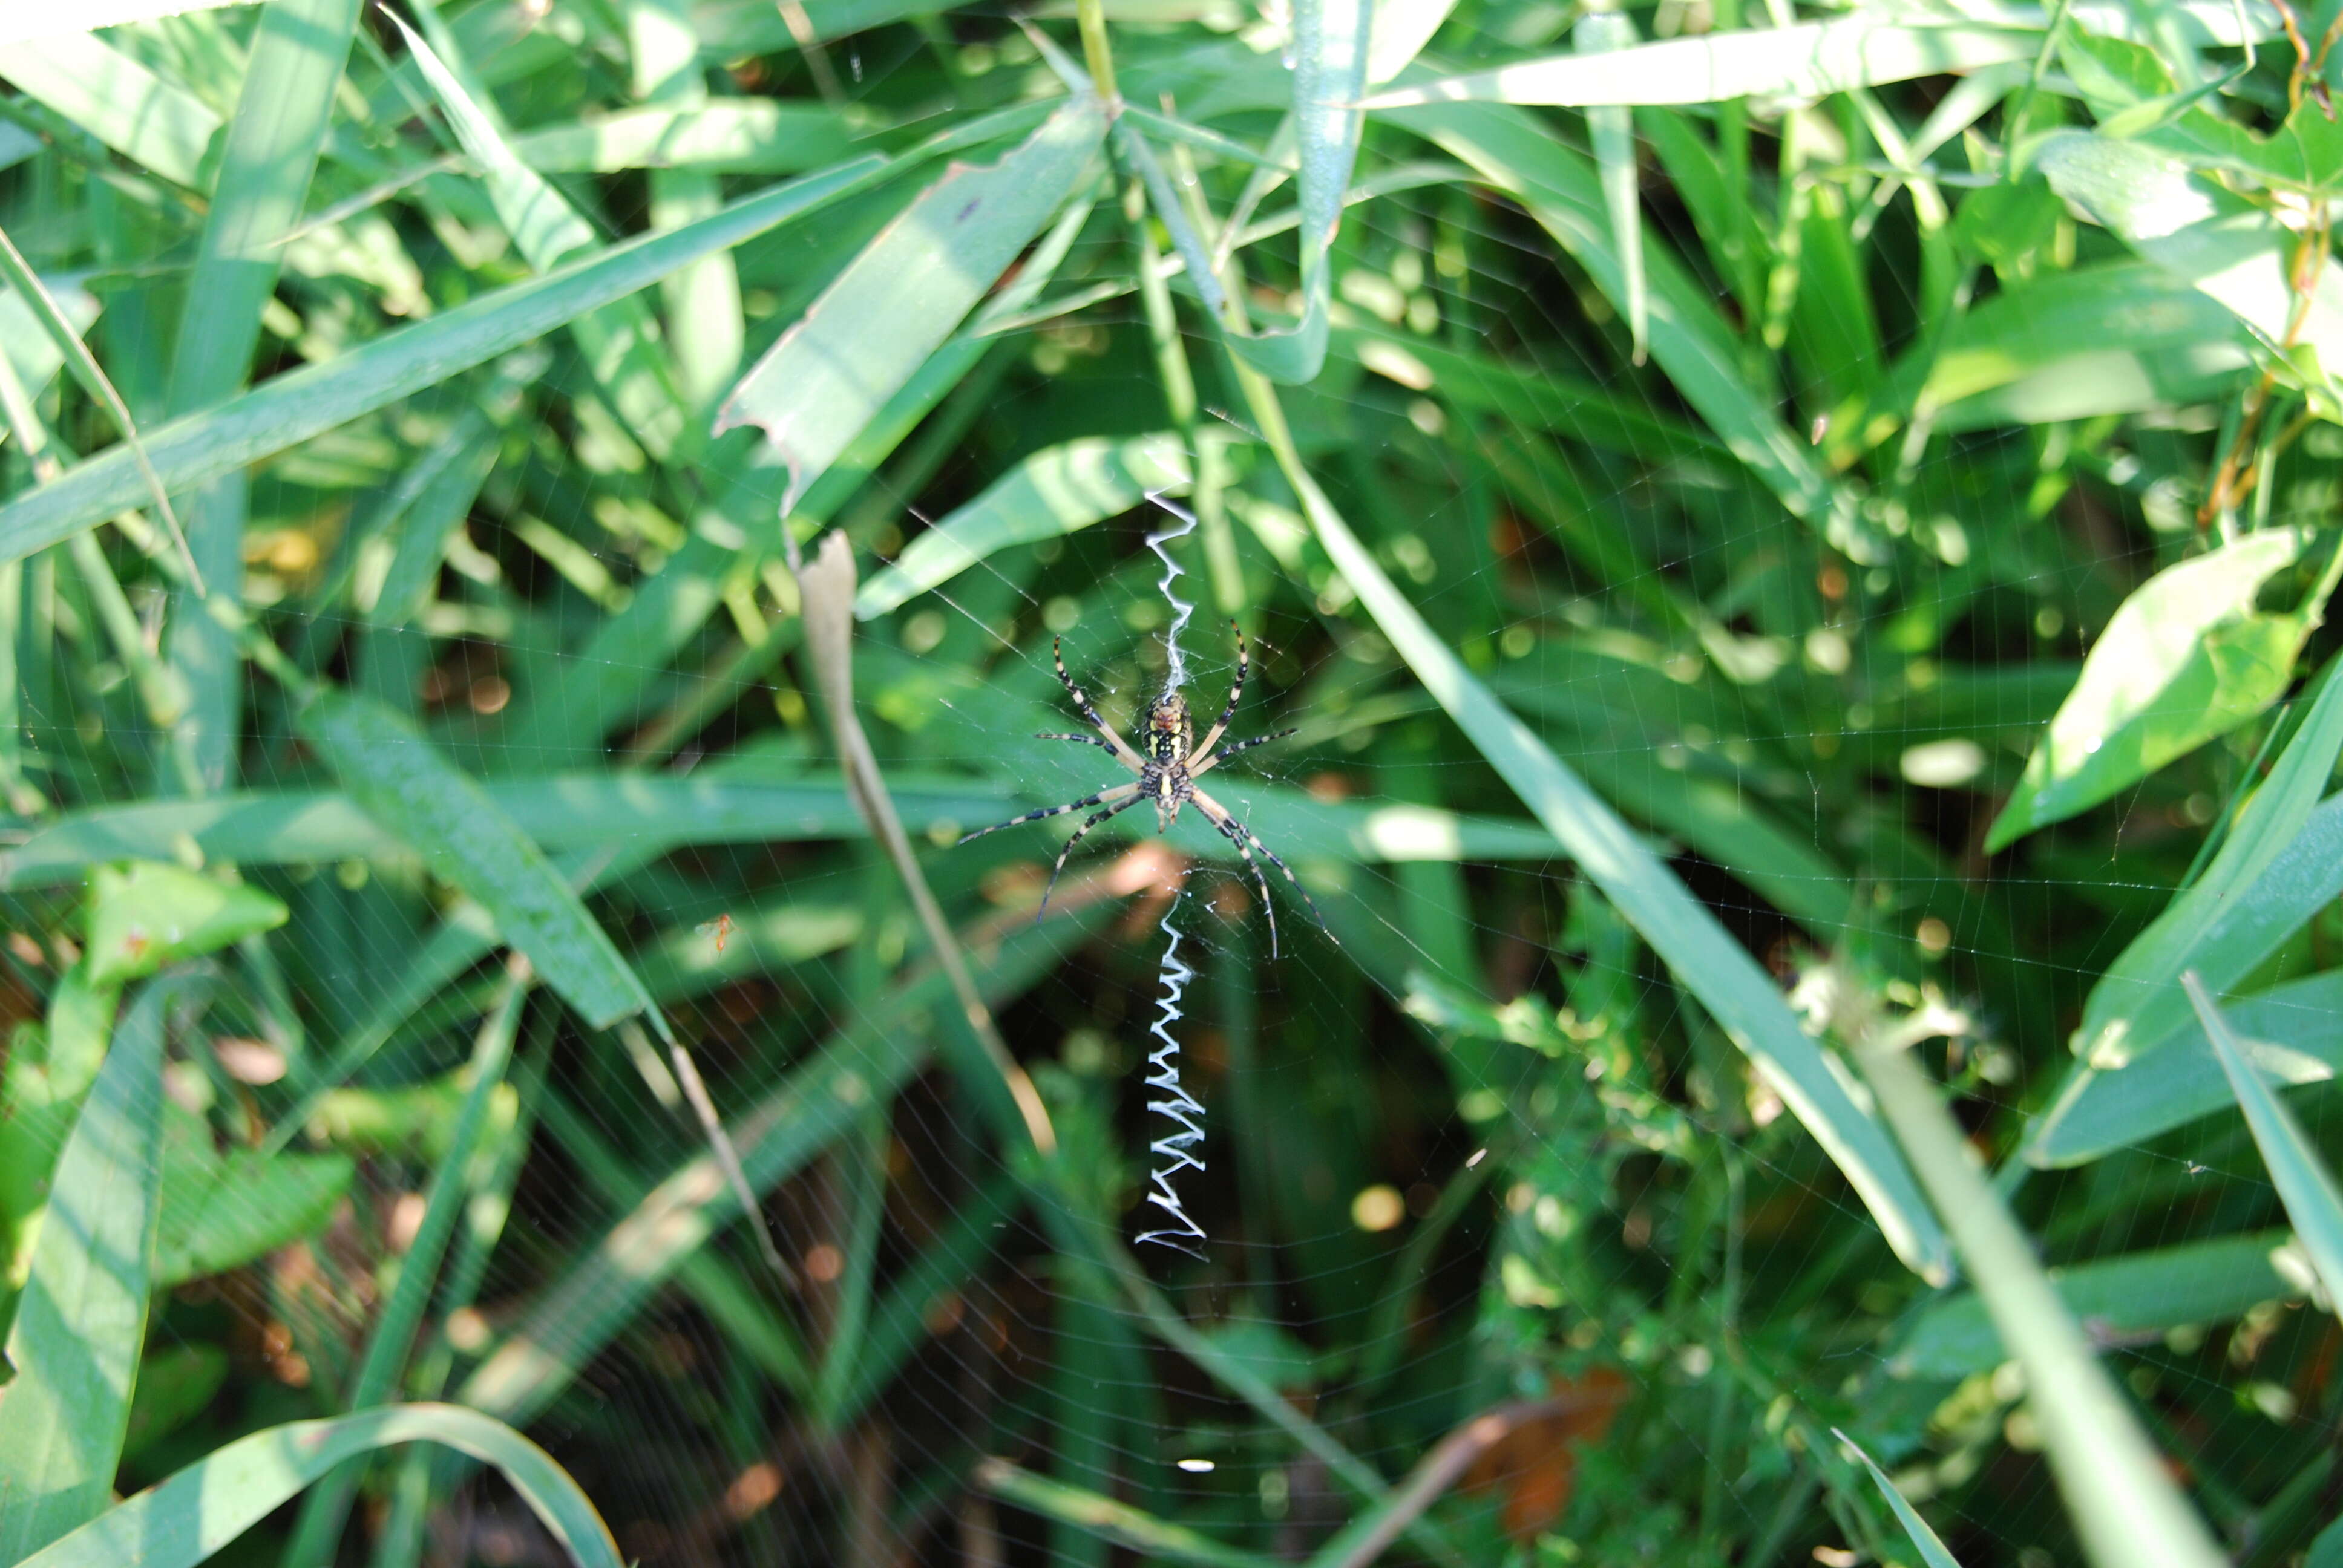 Image of Black-and-Yellow Argiope